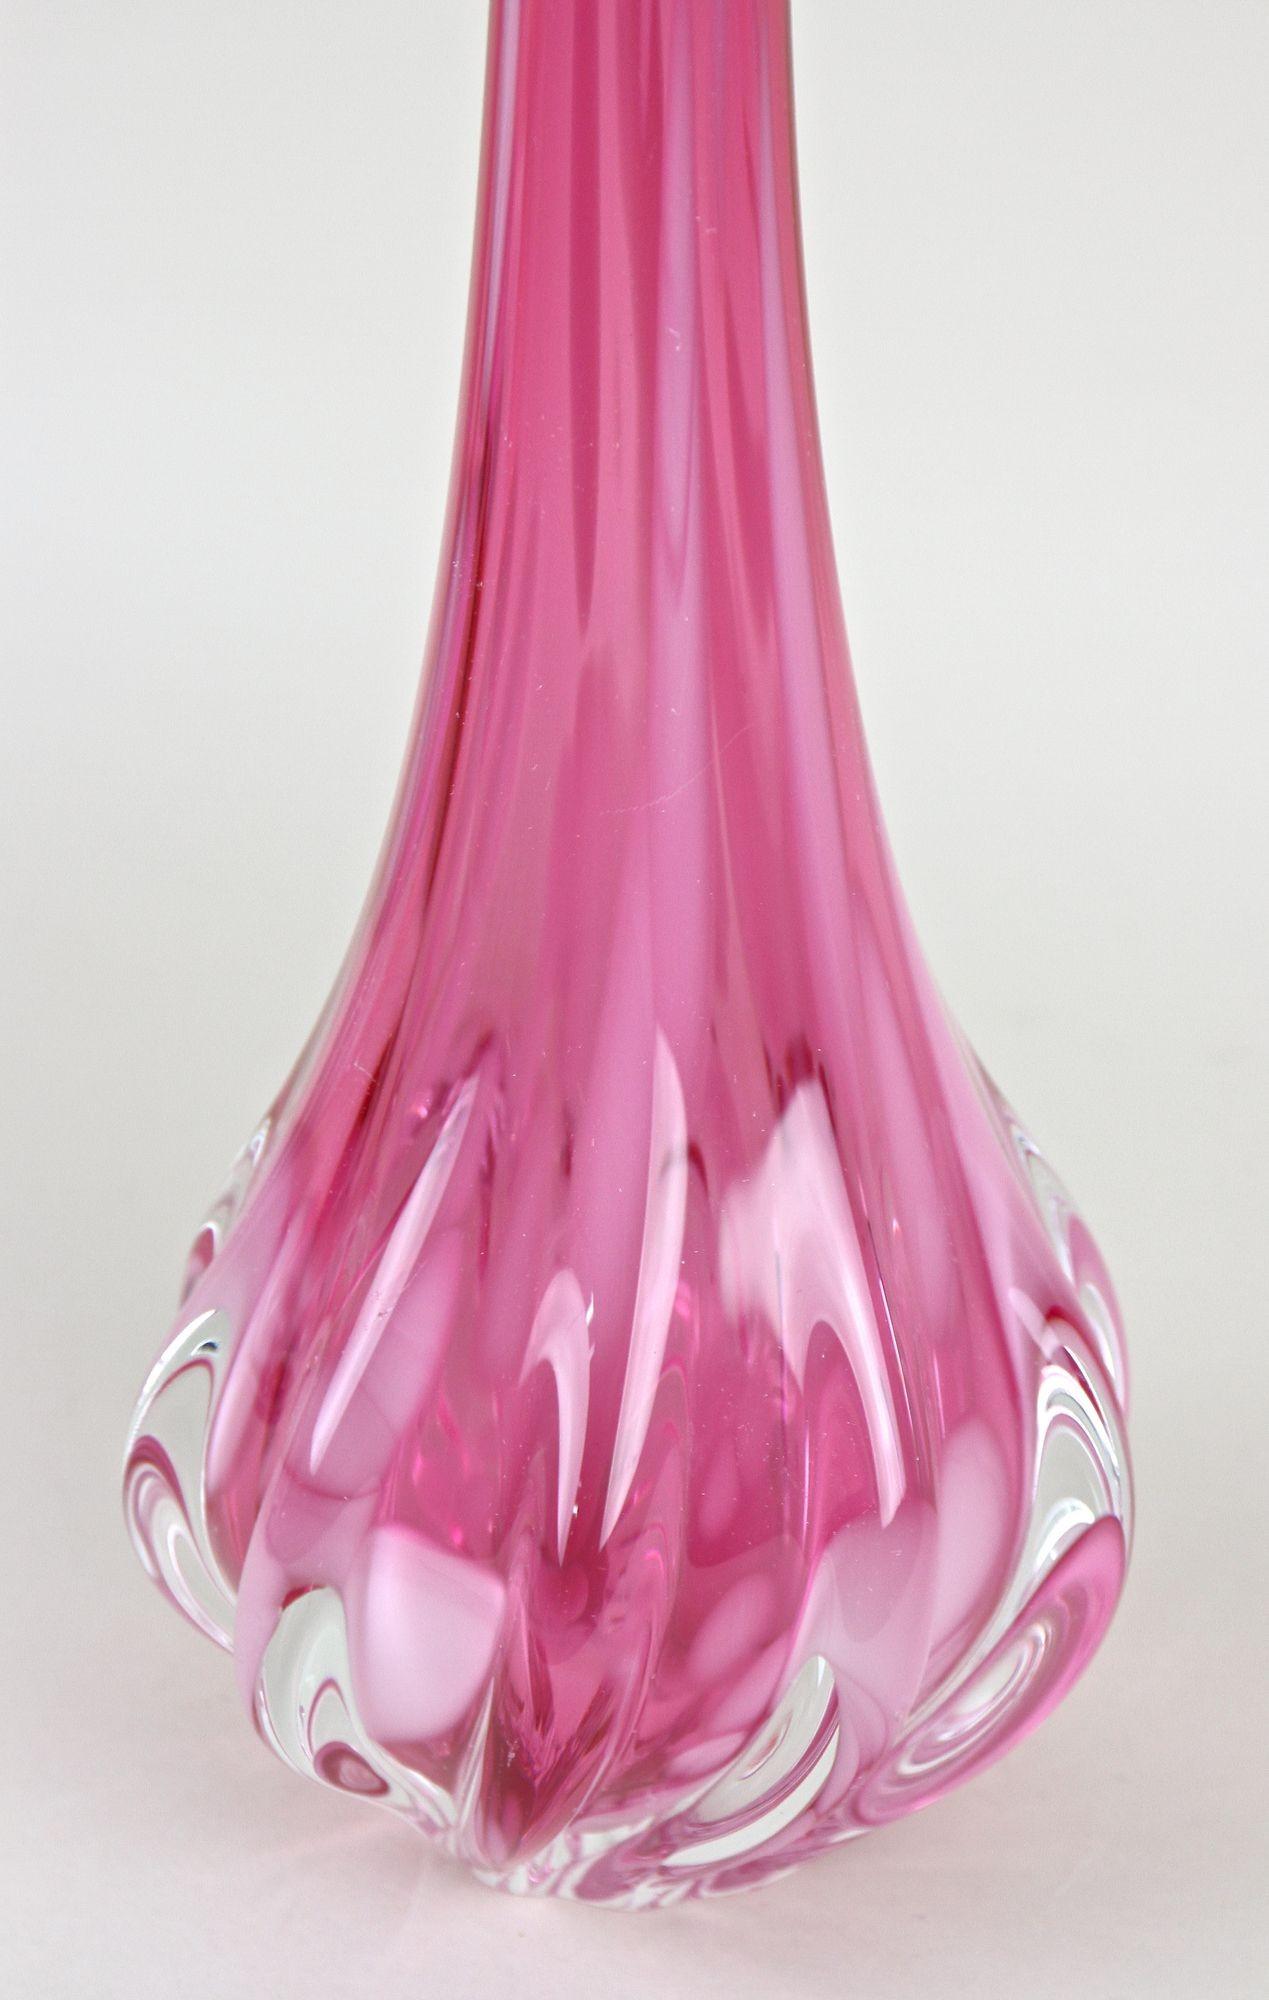 Pink Long Neck Murano Glass Vase, 20th Century, Italy circa 1970 For Sale 3